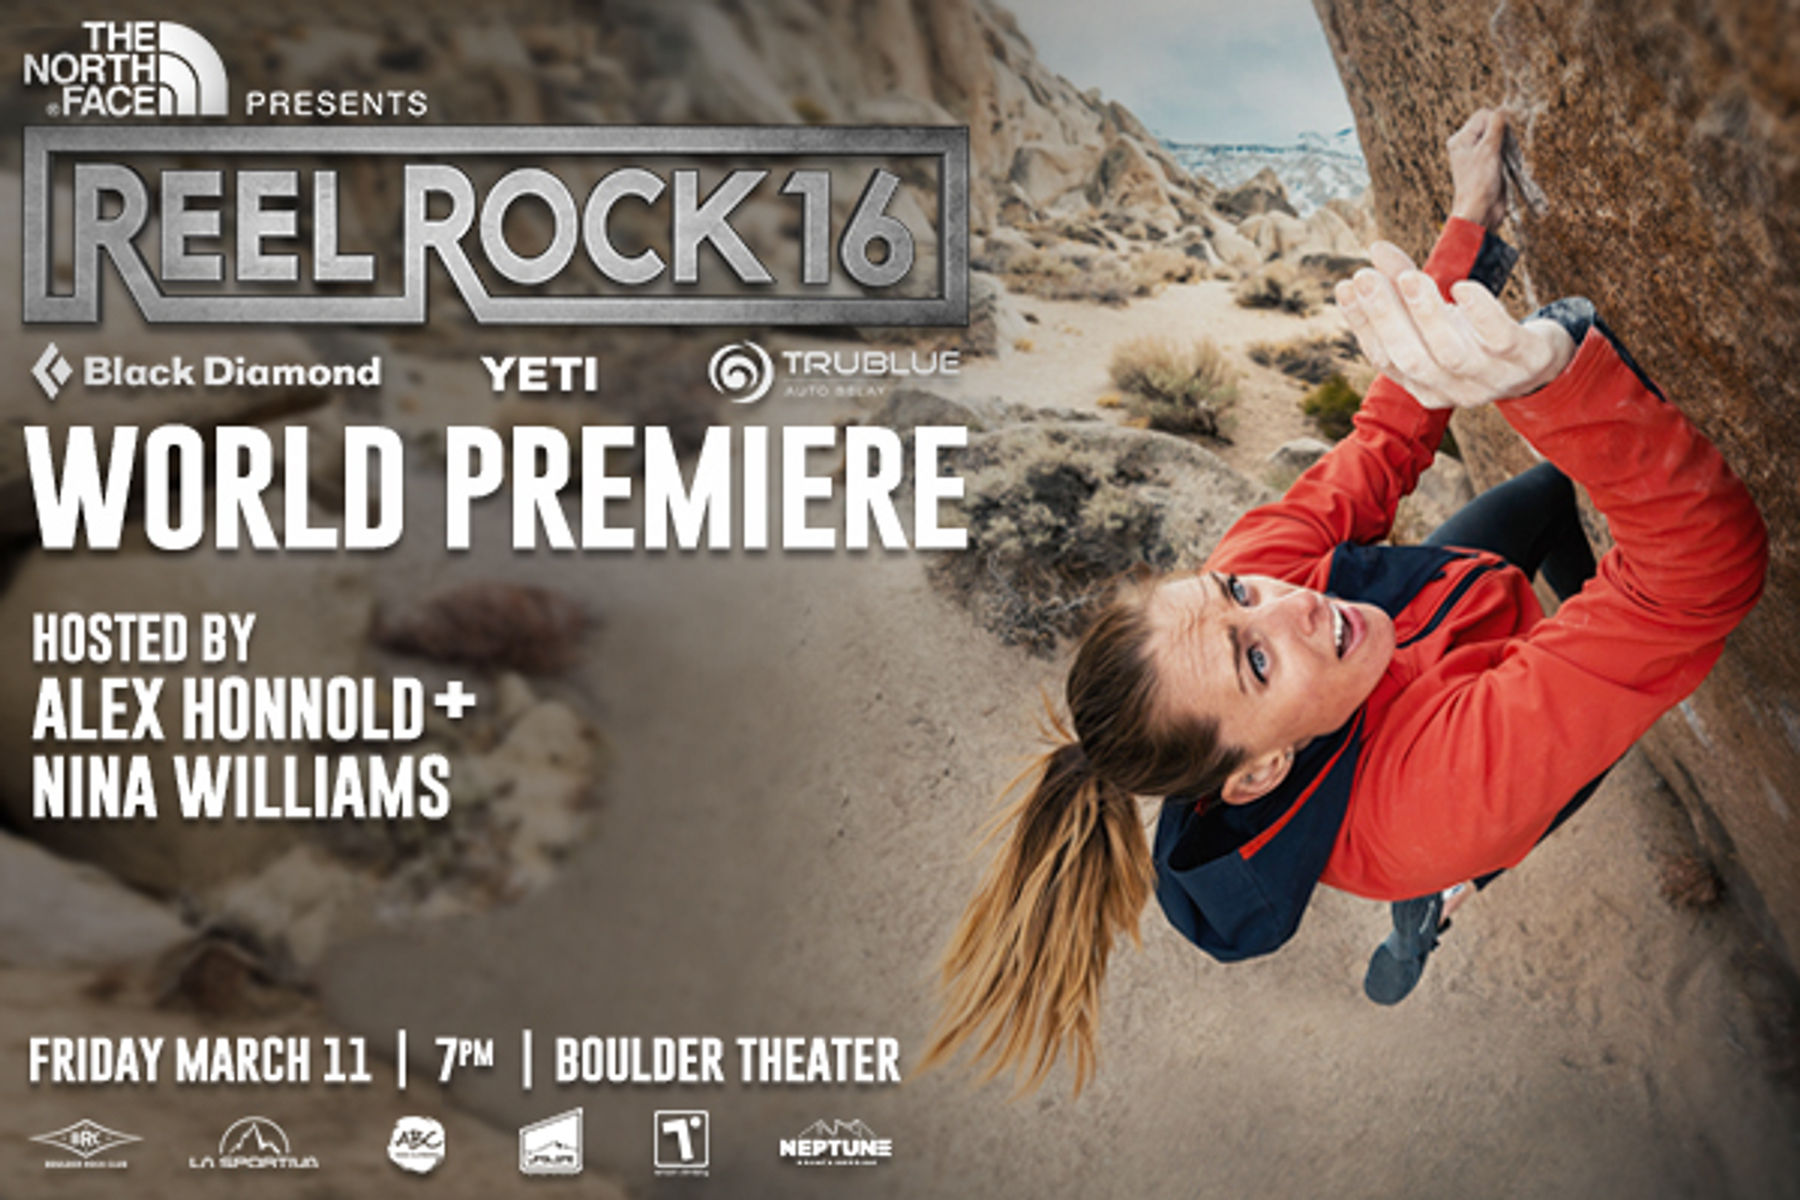 The North Face Presents Reel Rock 16 World Premiere - Hosted by